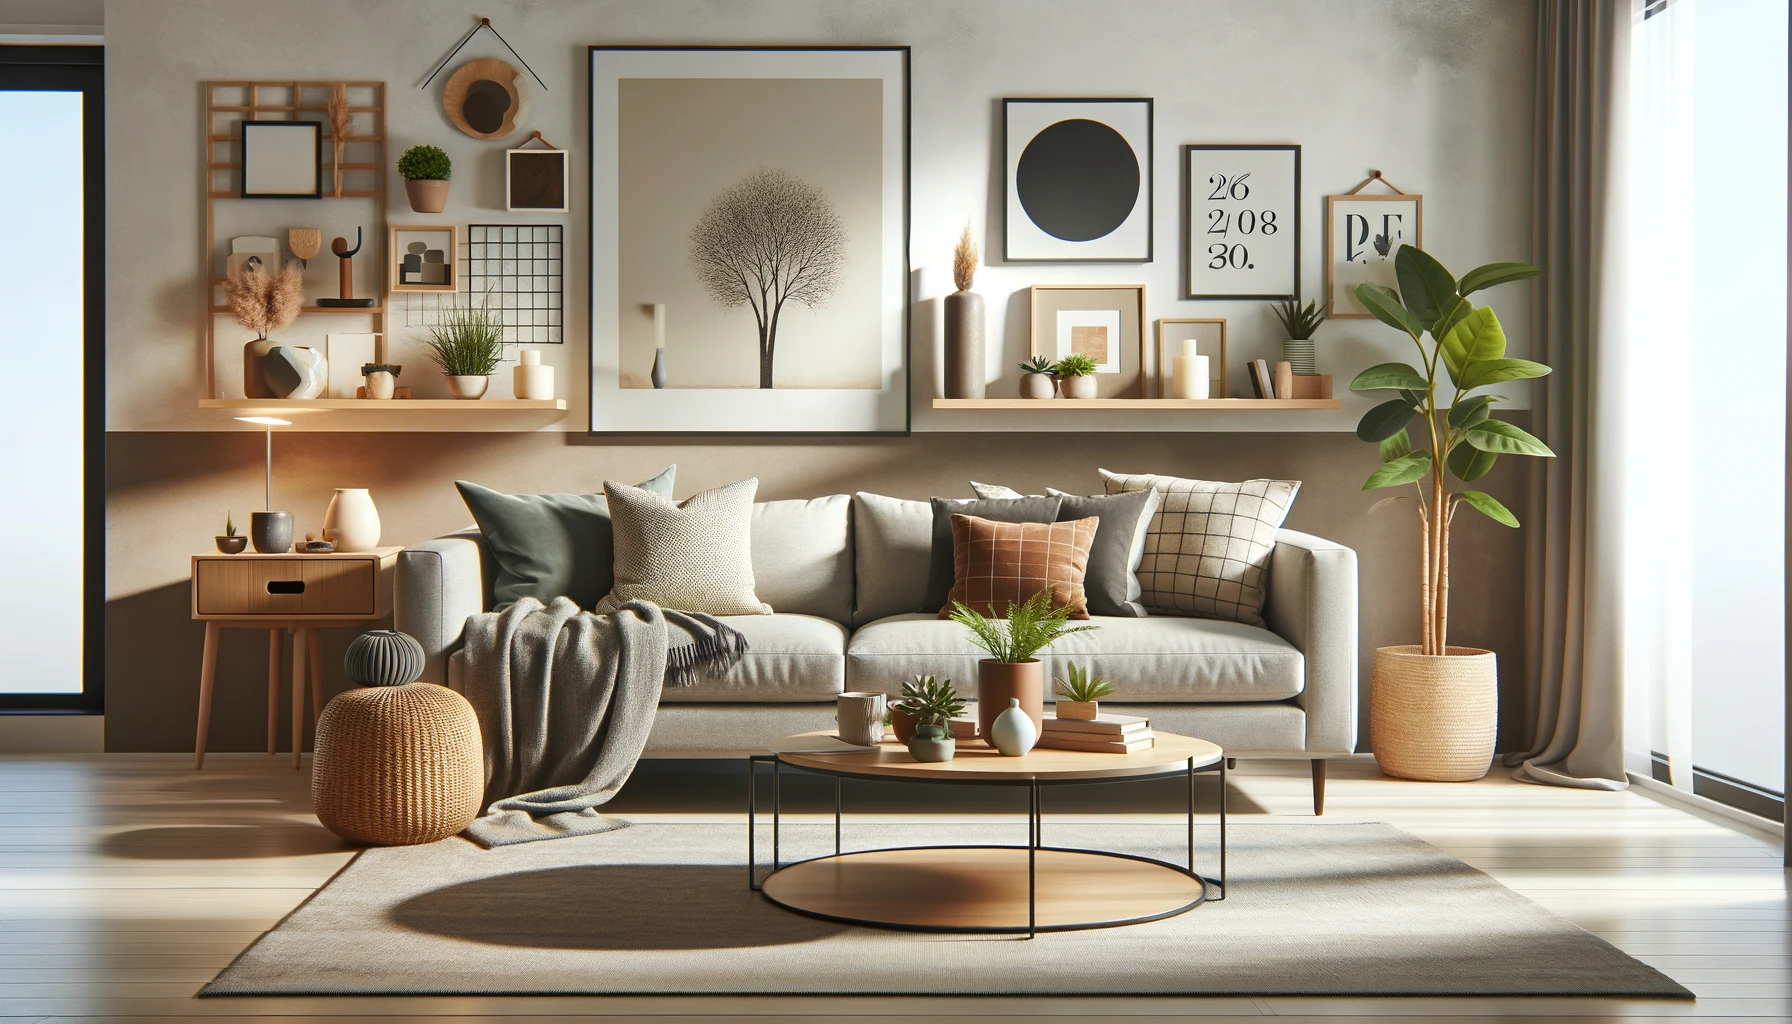 A-cozy-and-well-organized-living-room-with-modern-furniture-including-a-comfortable-sofa-stylish-coffee-table-and-various-decorative-elements